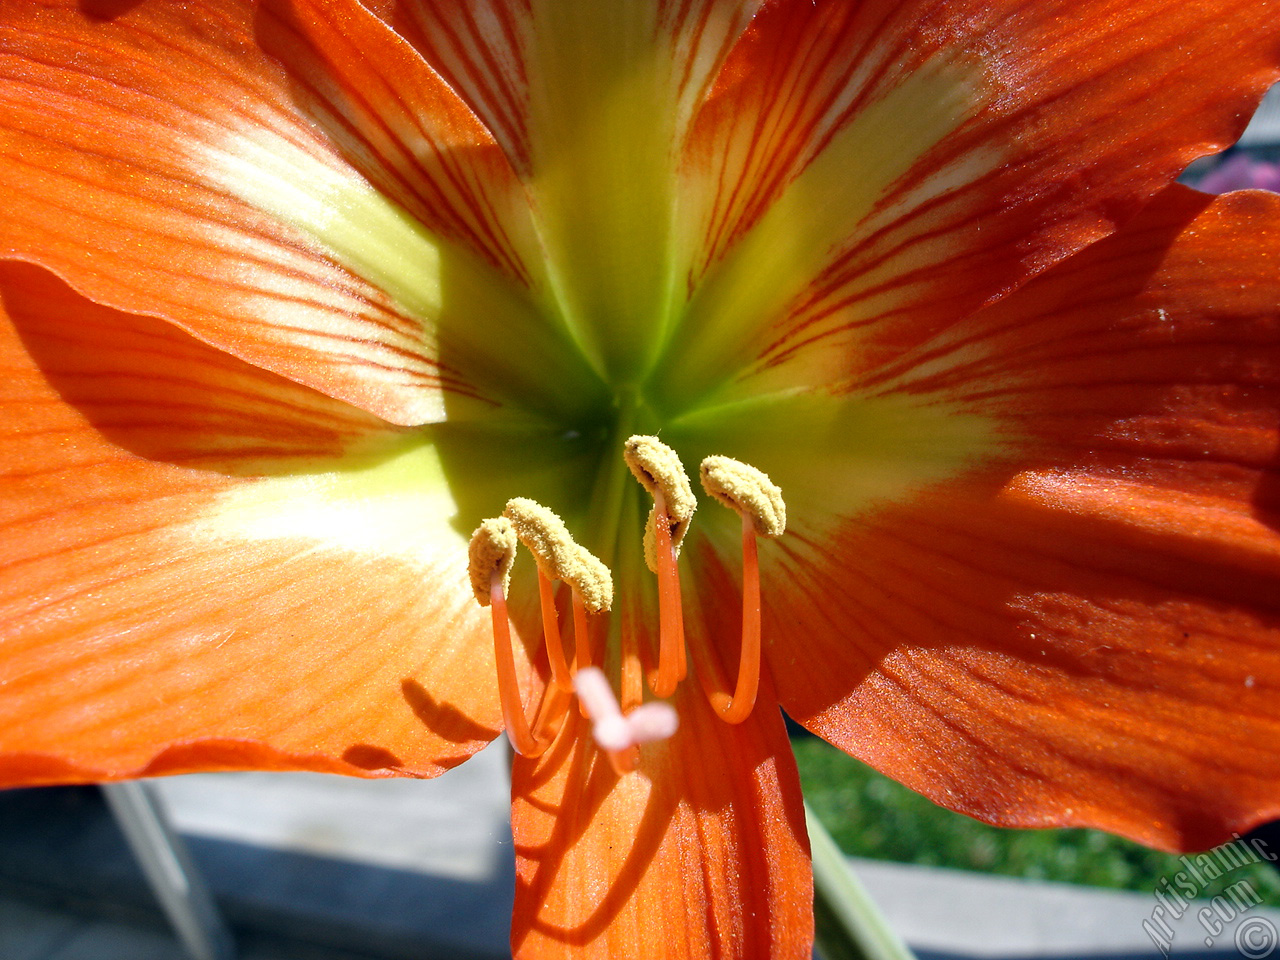 Red color amaryllis flower.
